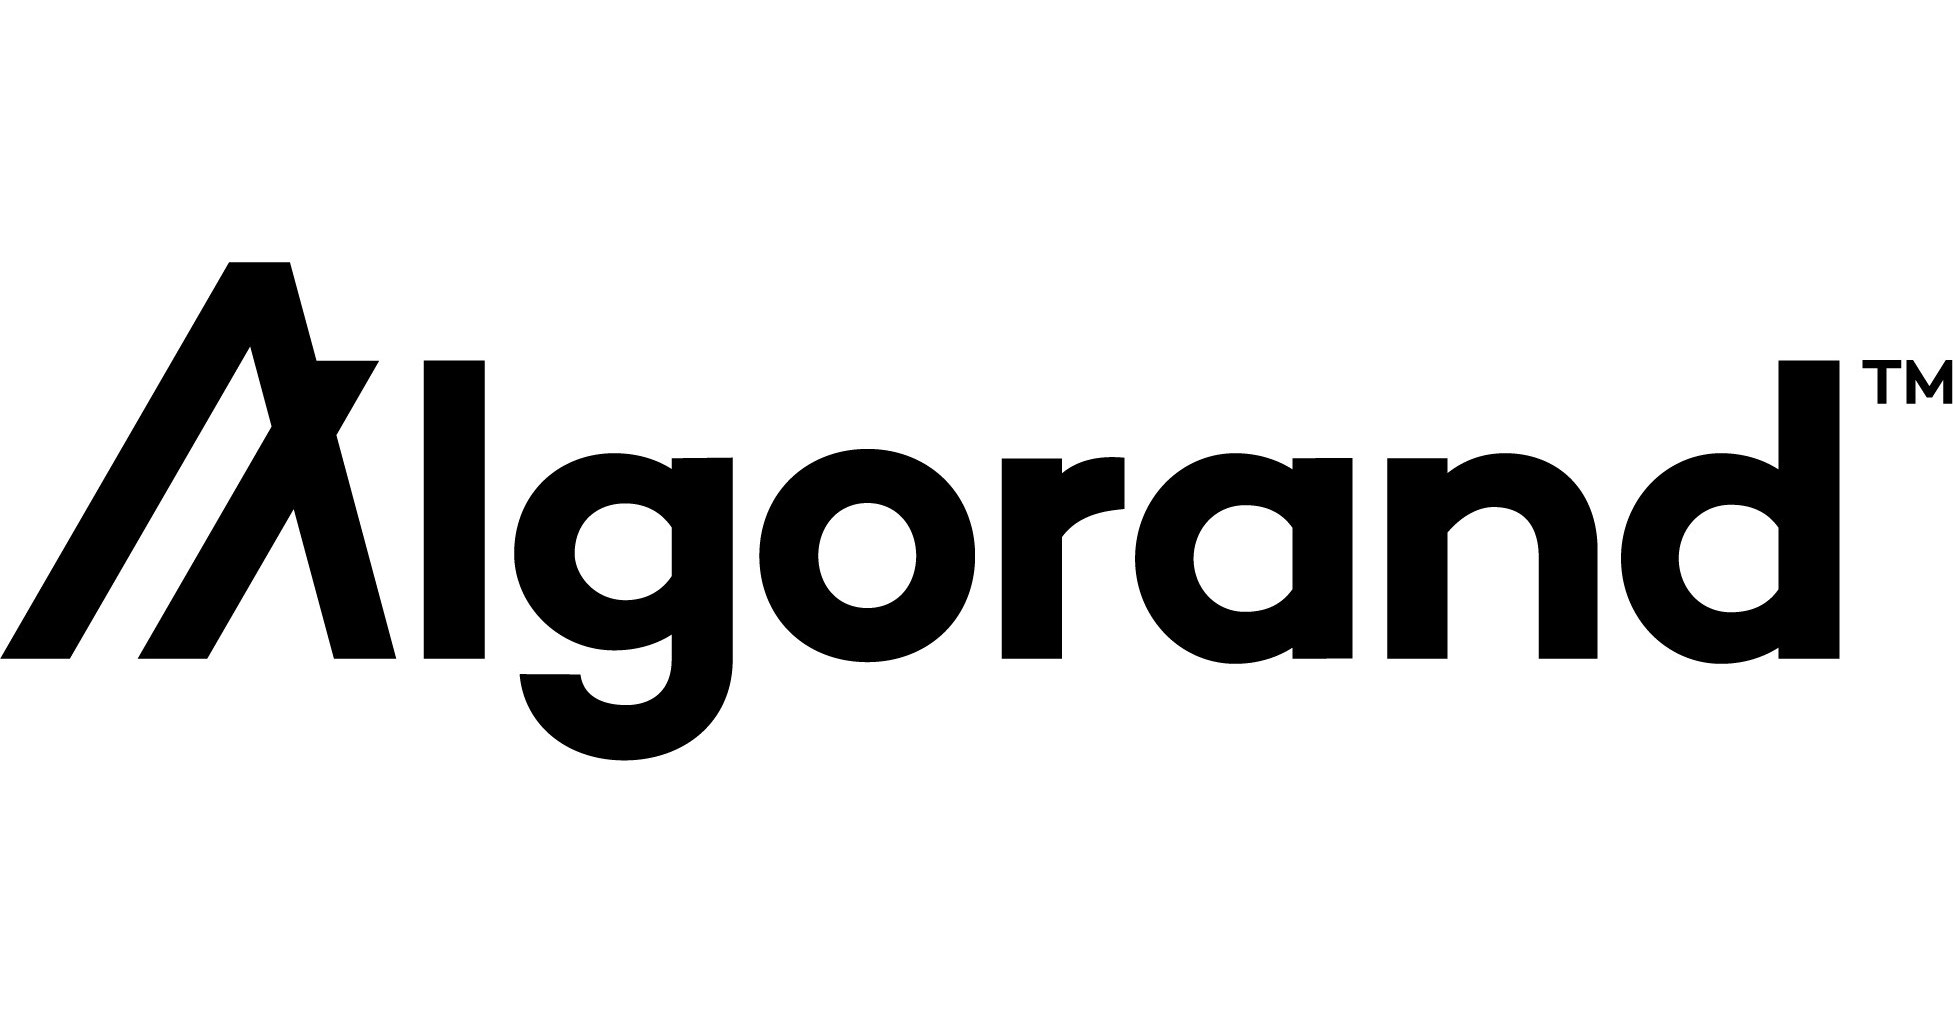 Algorand went live in 2019